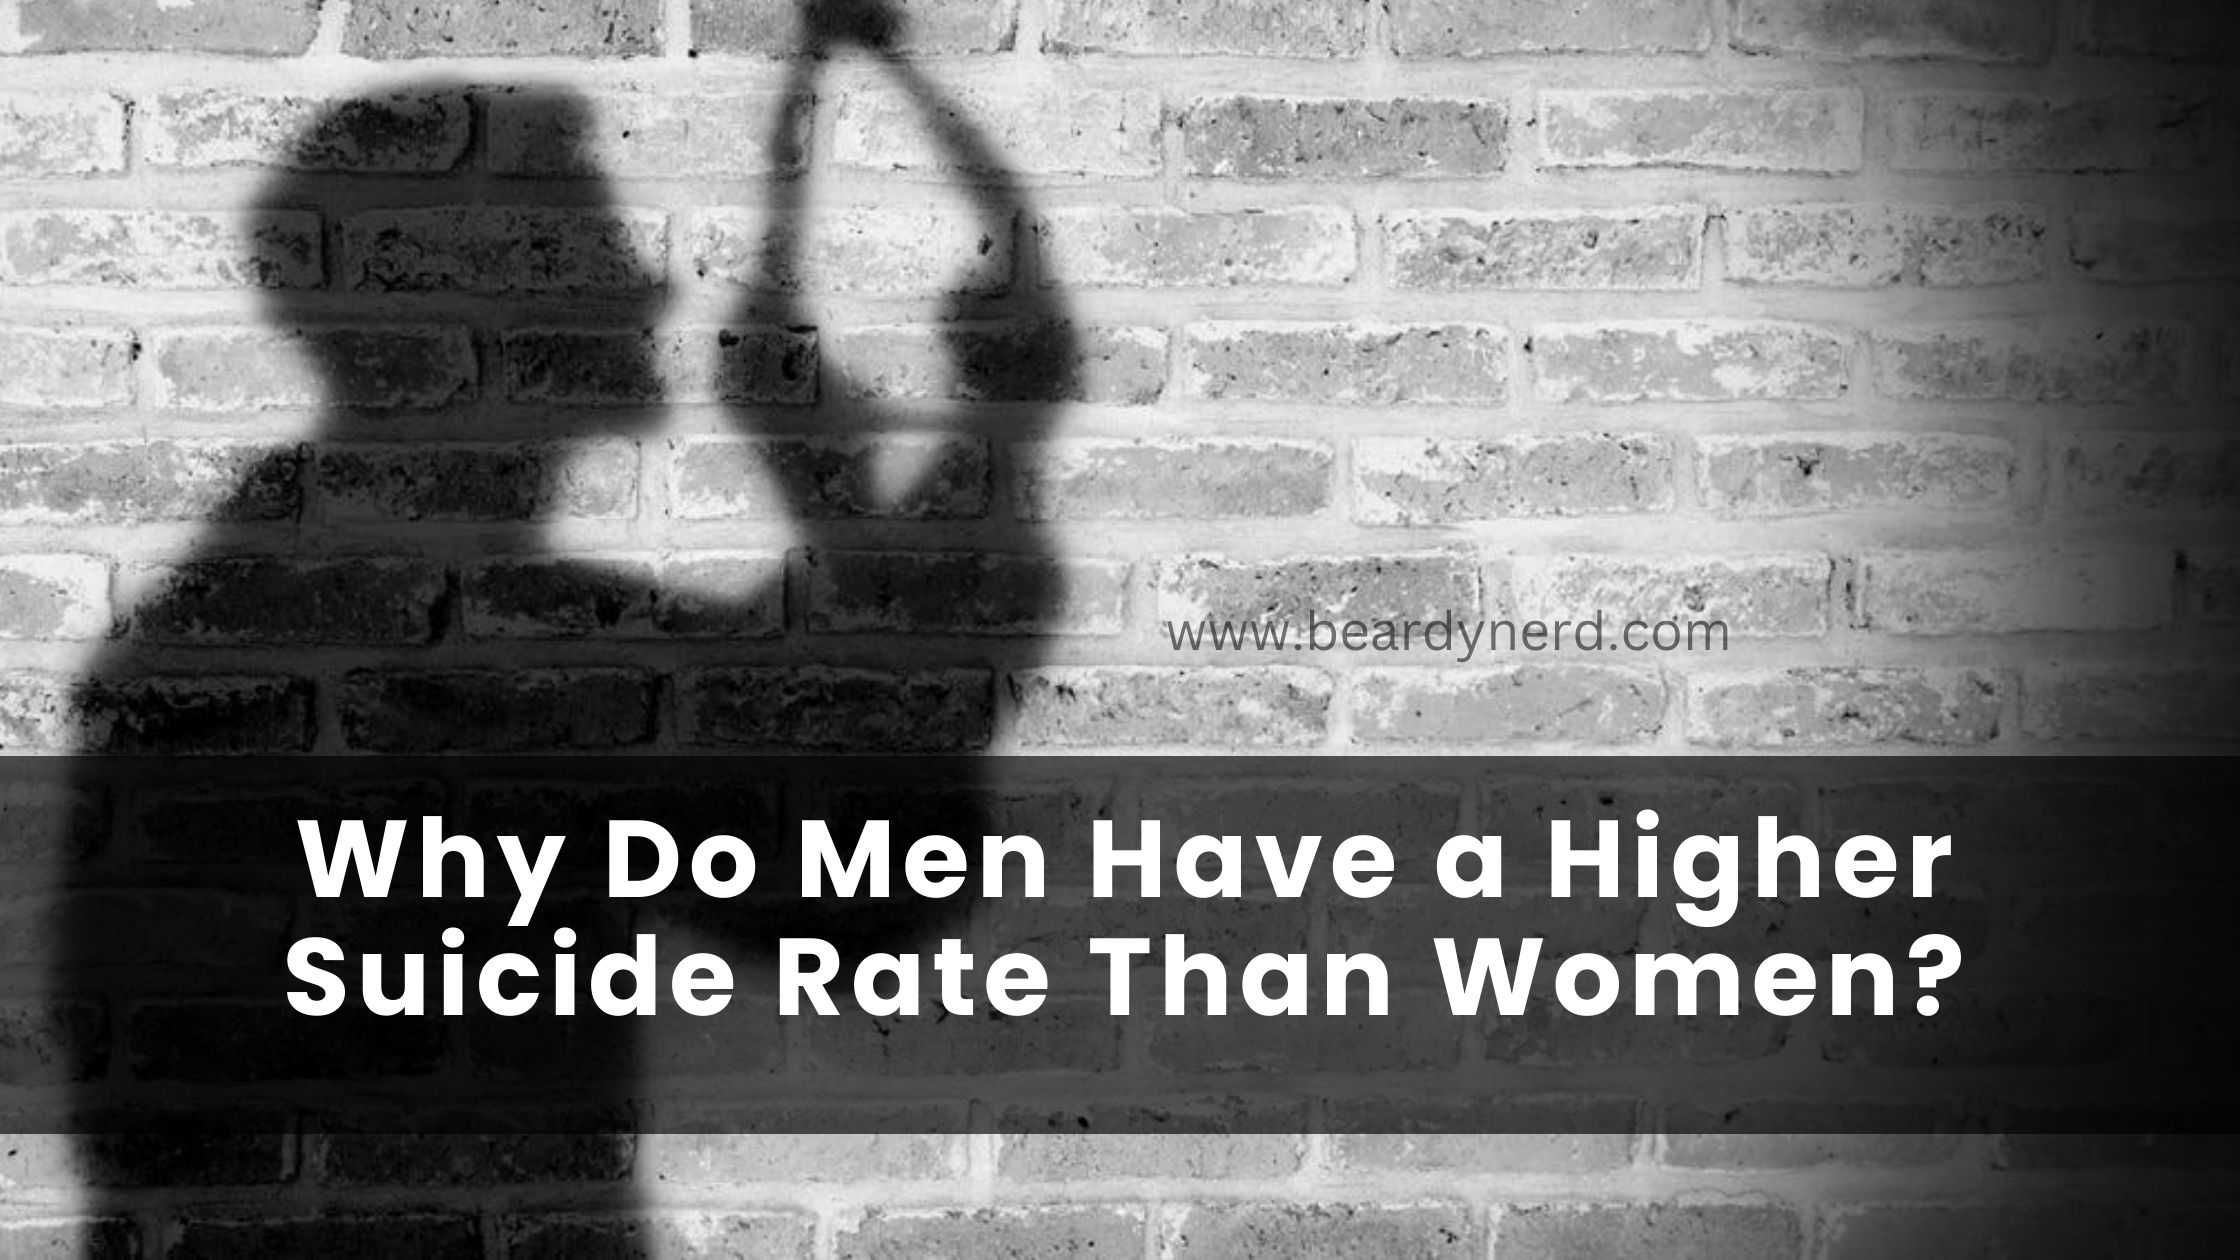 Why Do Men Have a Higher Suicide Rate Than Women? - Beardy Nerd